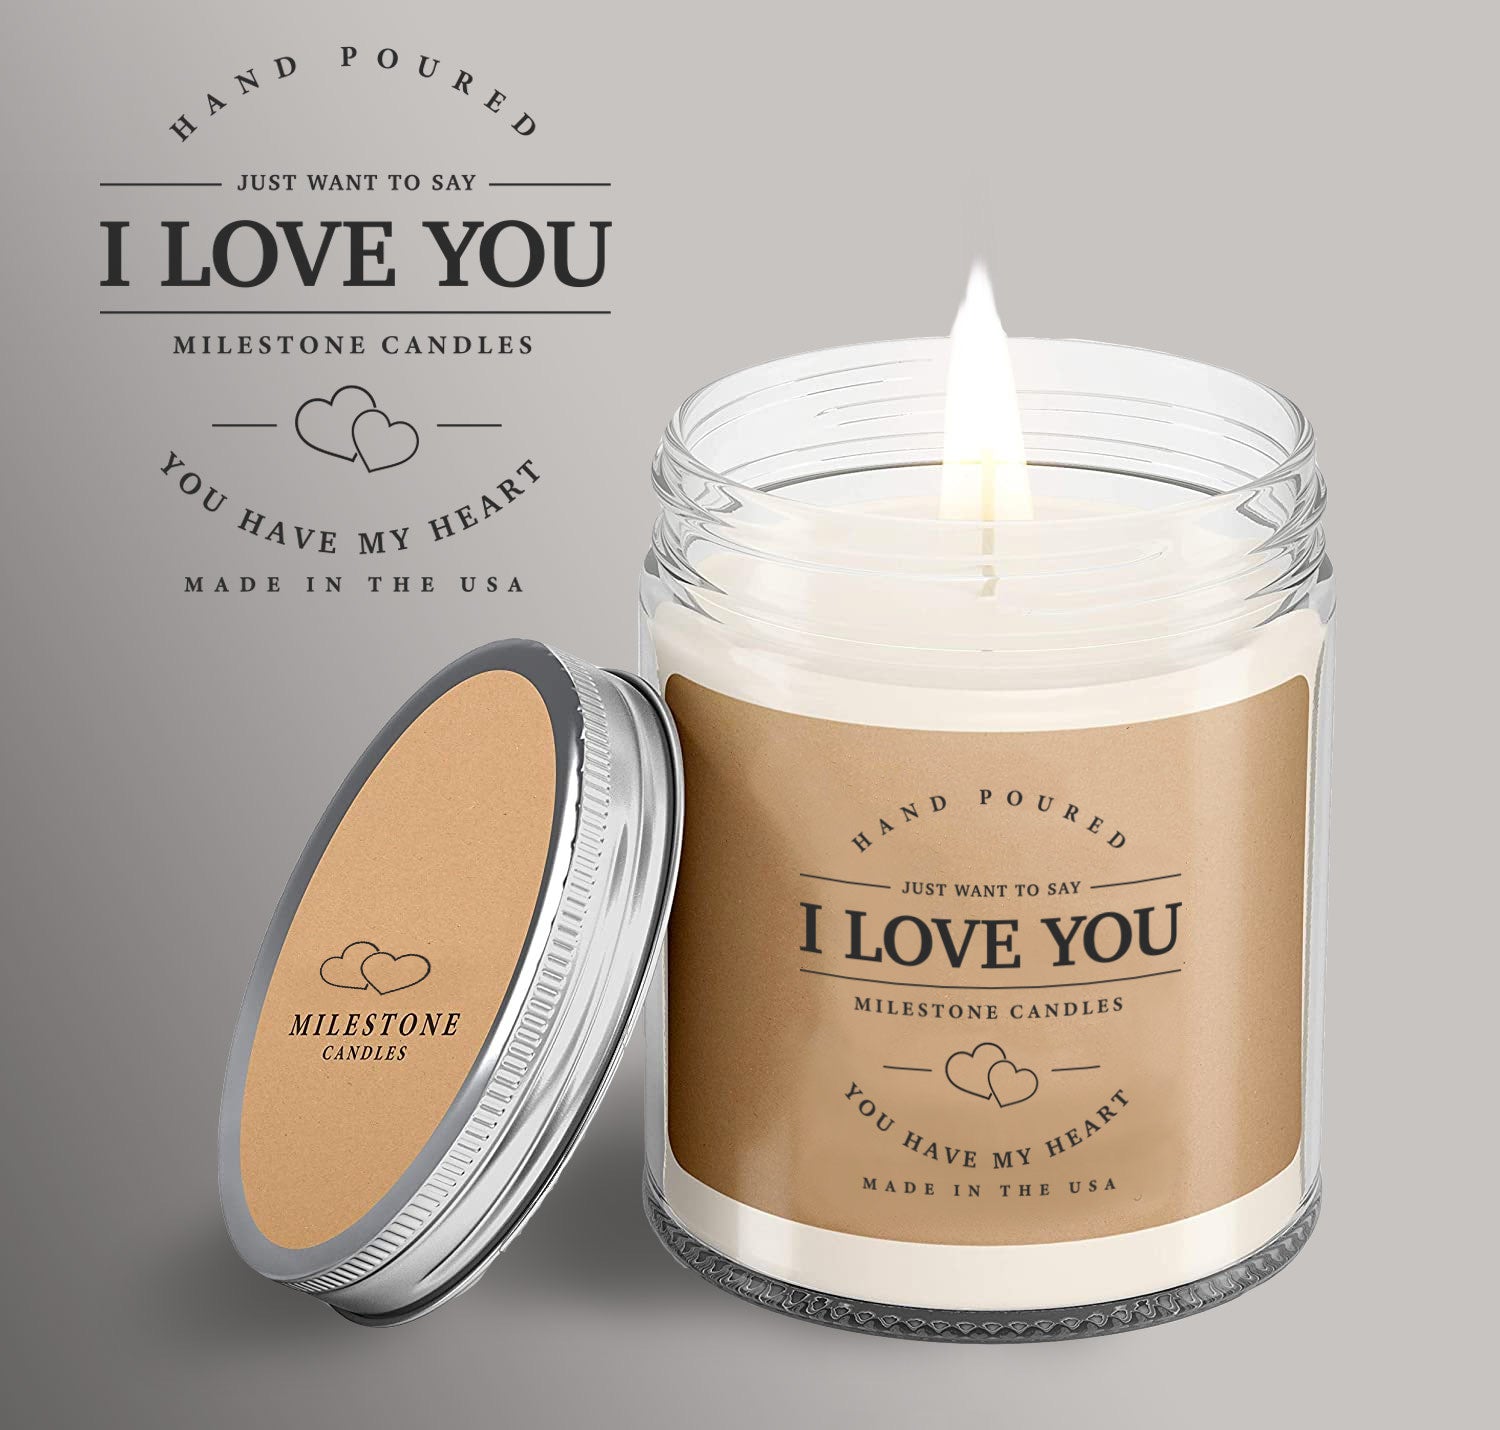 Massage Candle - A Party in A Jar – Effervesce. Its Just Bubbles